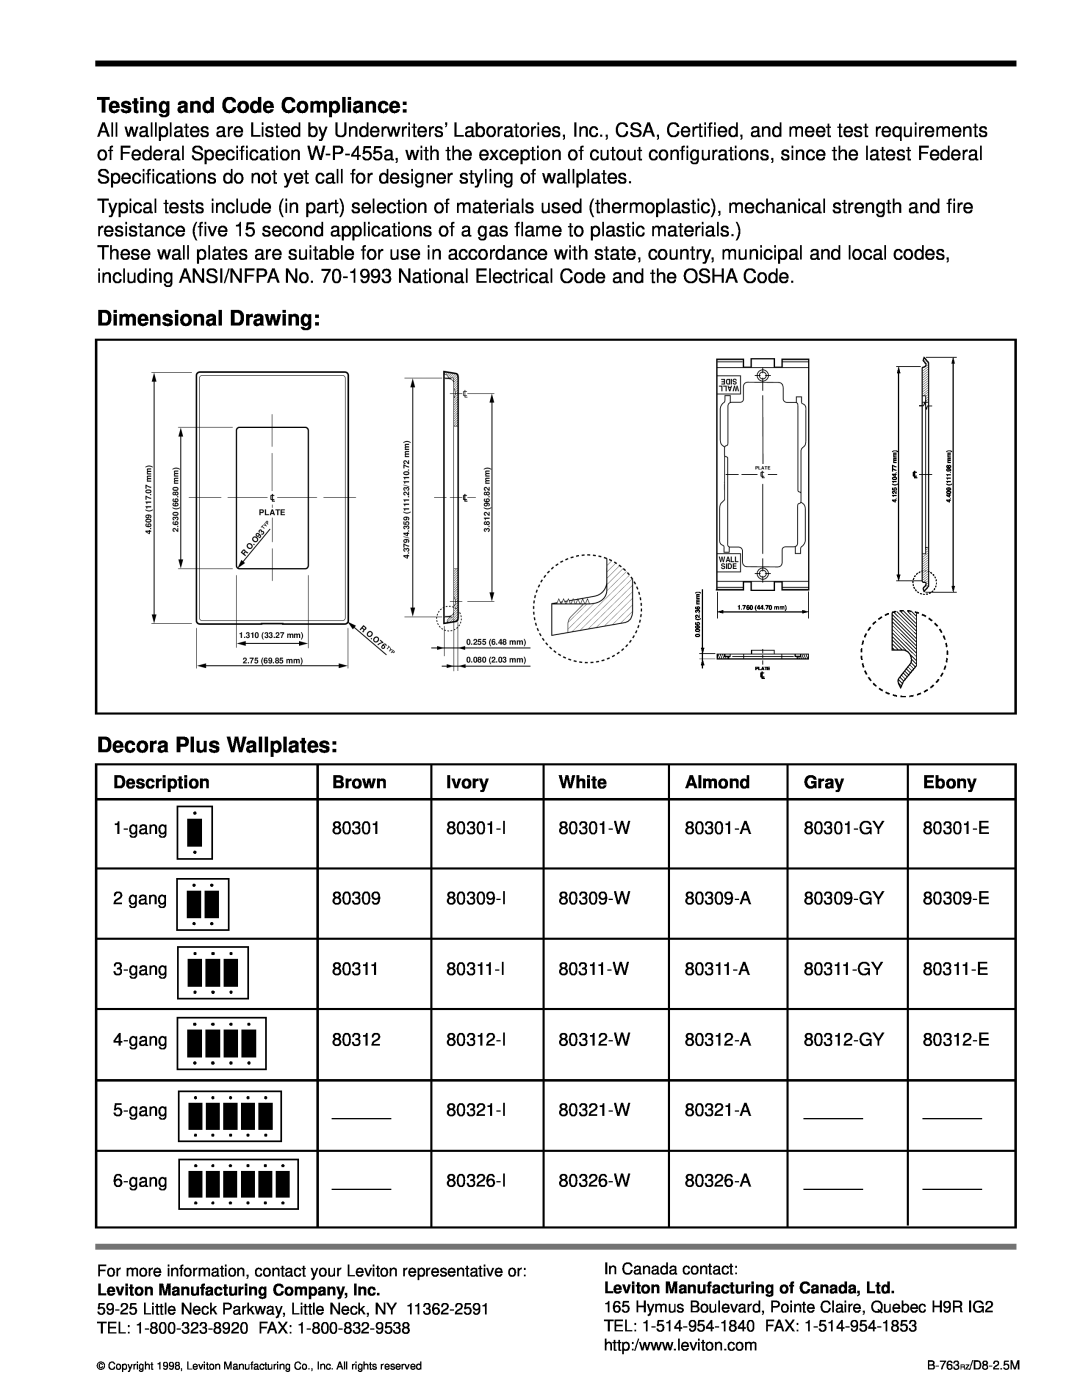 Leviton 80312 Testing and Code Compliance, Dimensional Drawing, Decora Plus Wallplates, Description, Brown, Ivory, White 